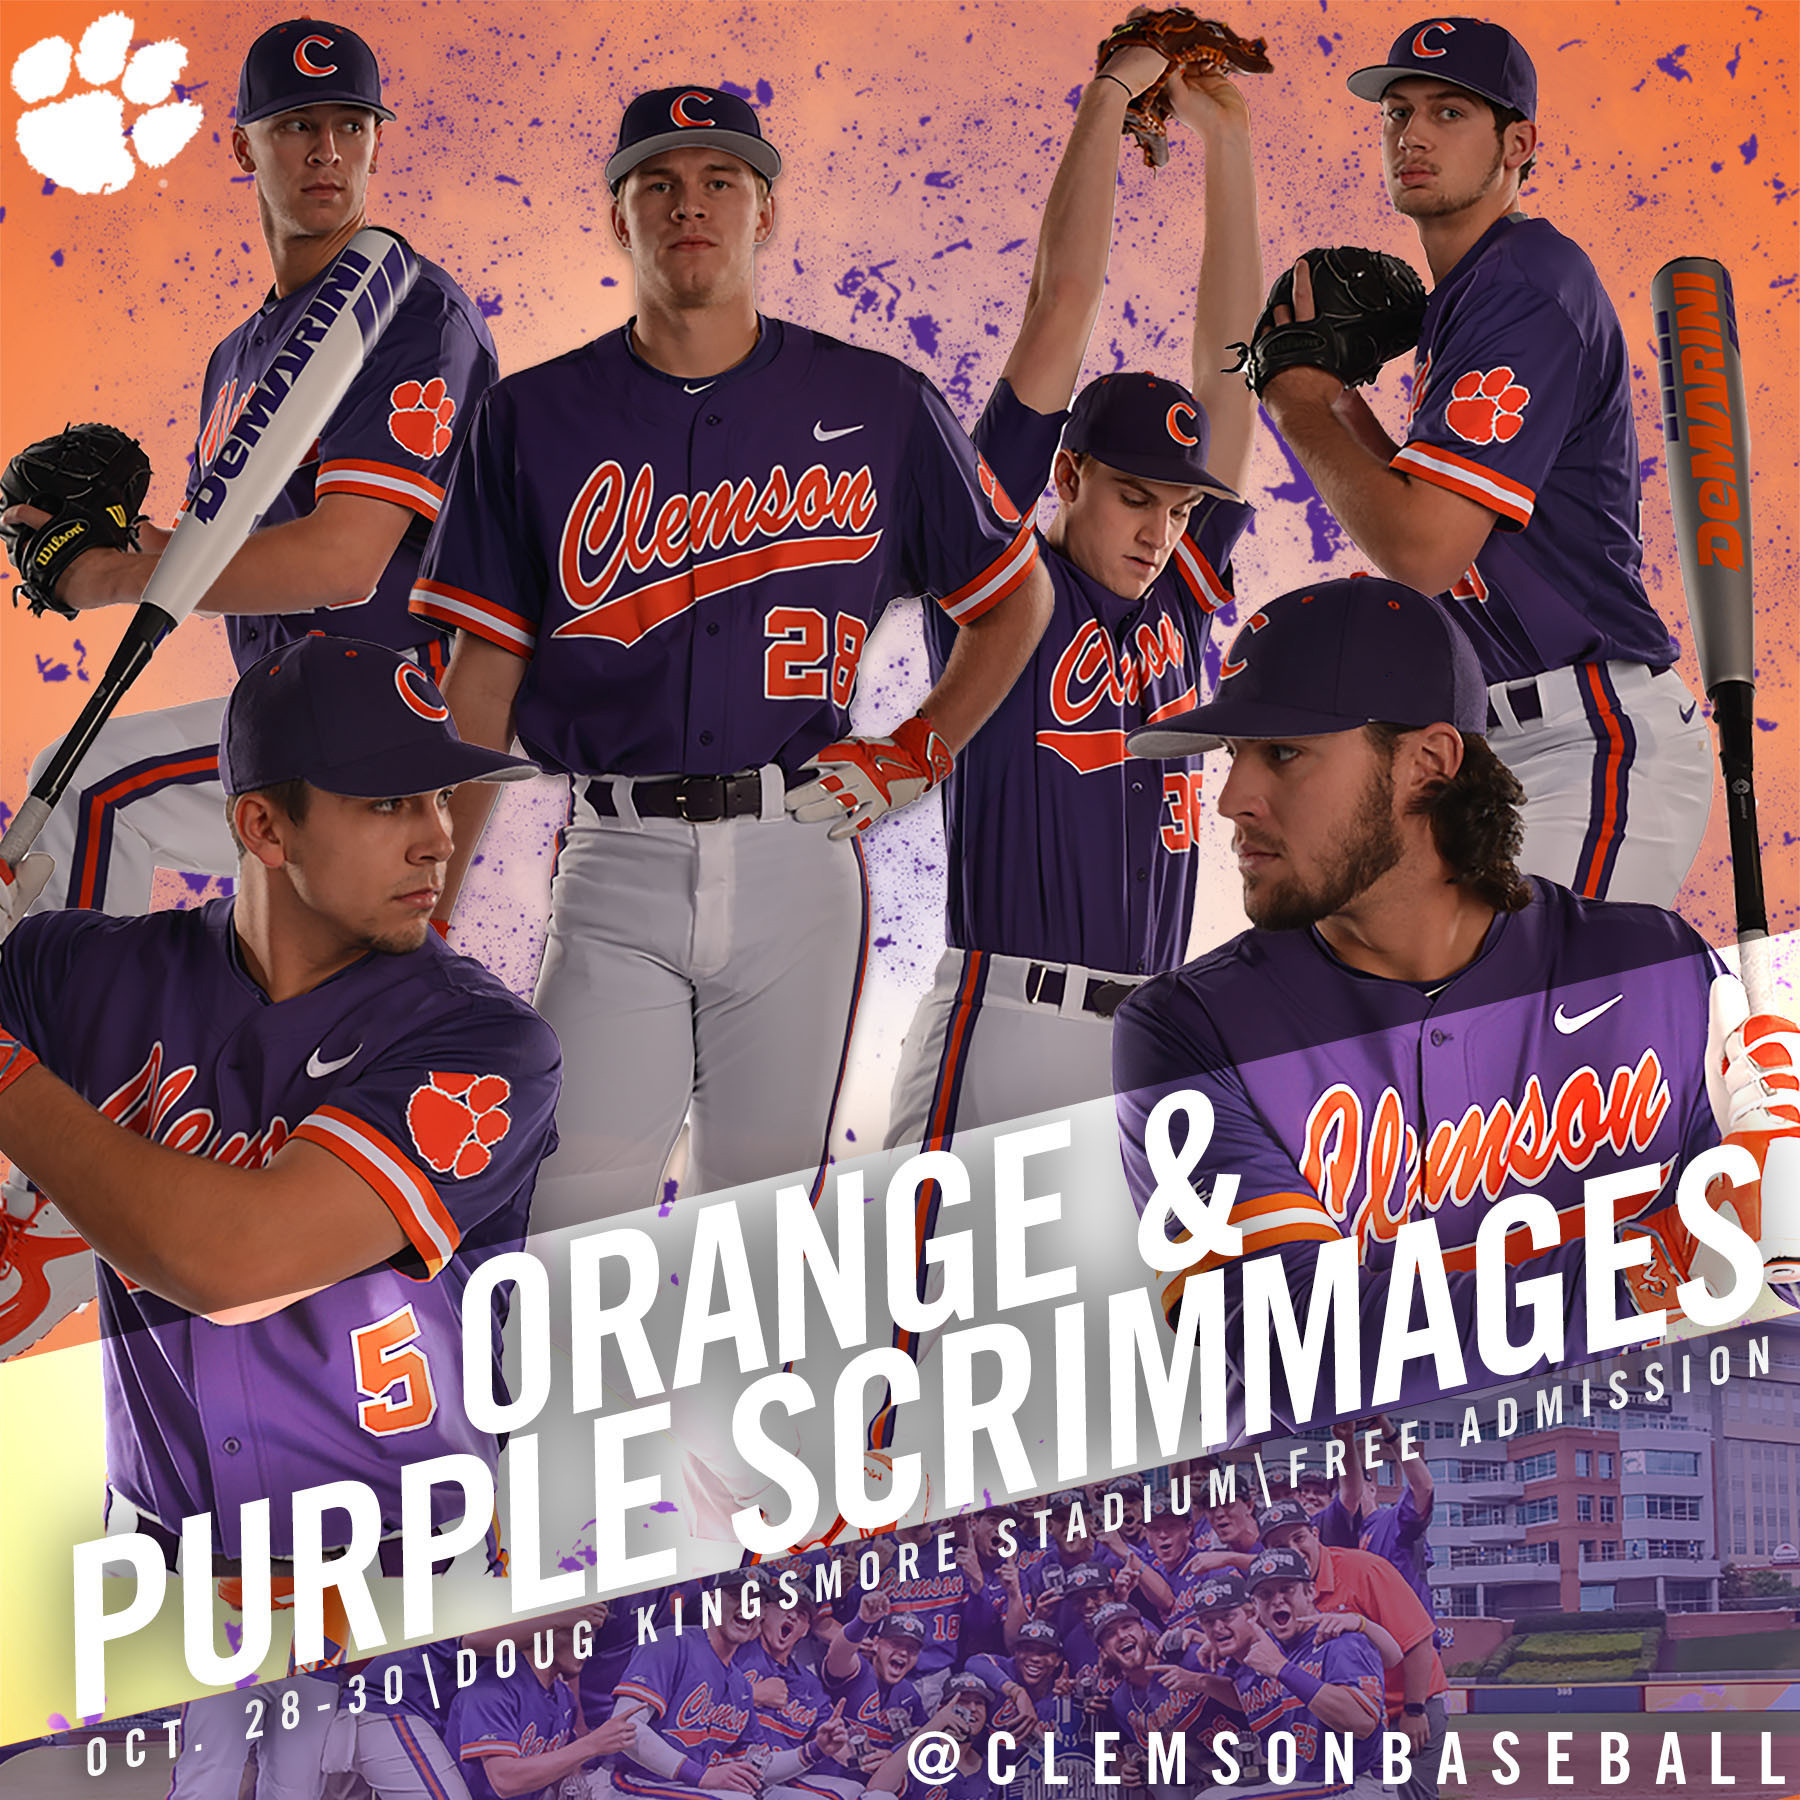 Tigers to Play O&P Scrimmages